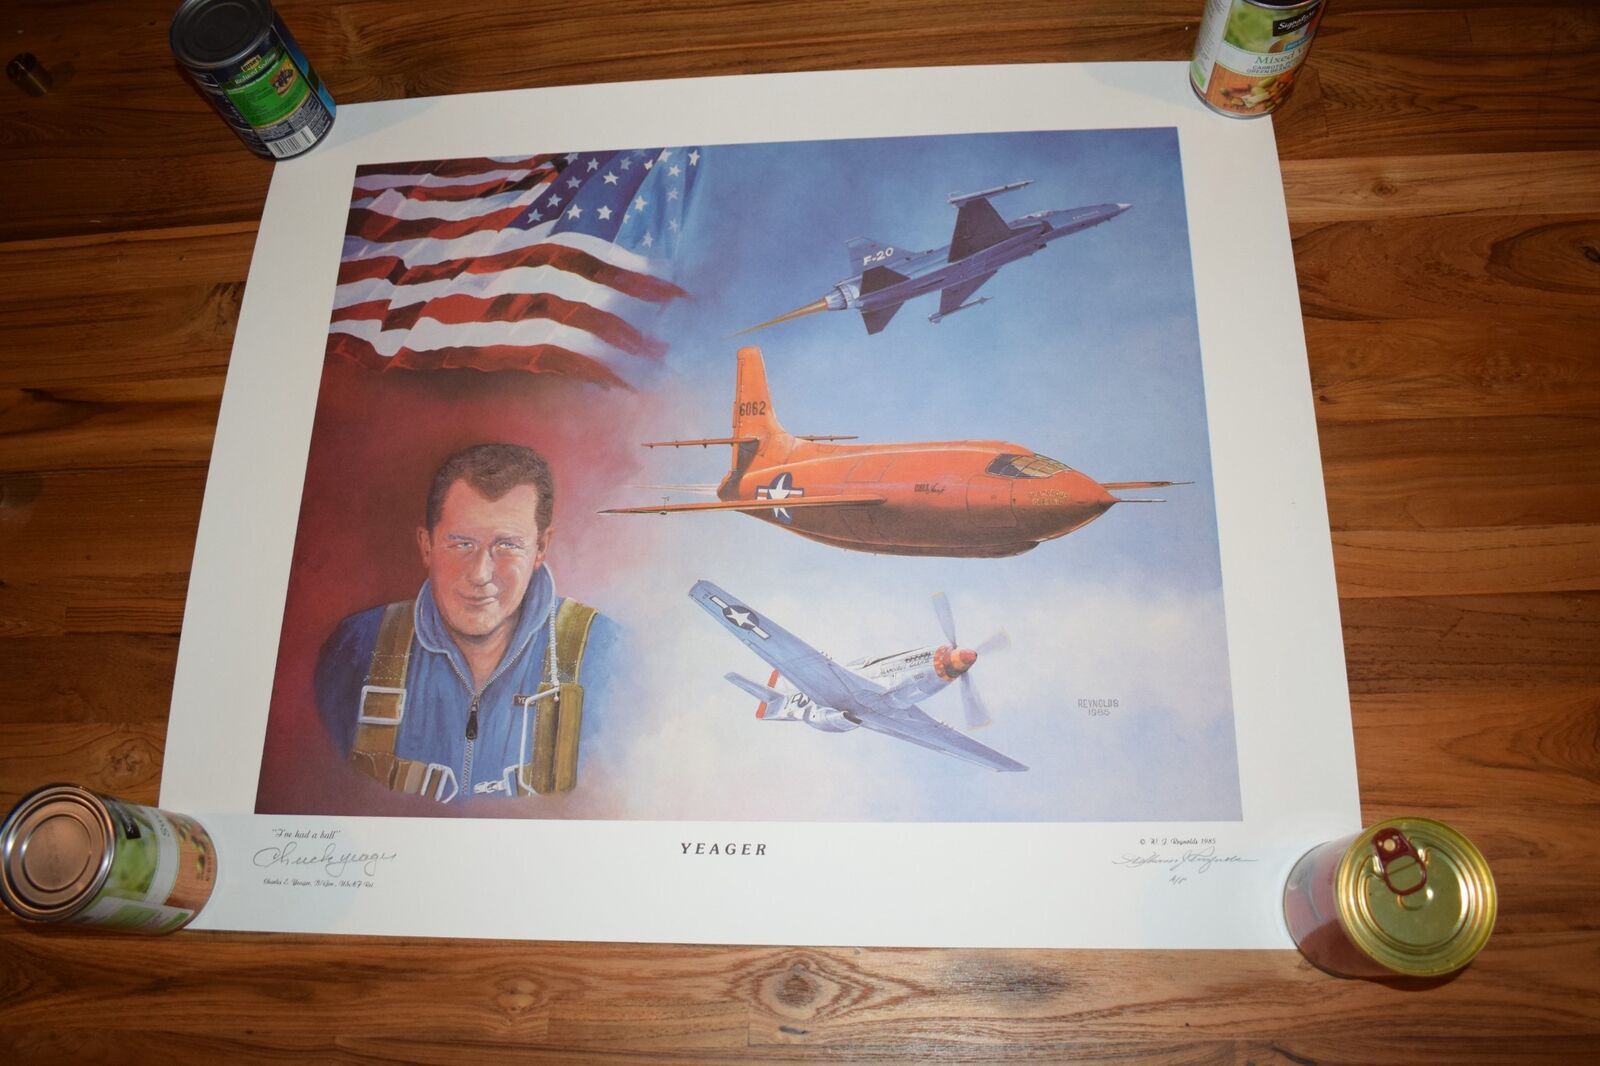 *TC* YEAGER BY WJ REYNOLDS 1985 SIGNED CHUCK YEAGER  (SPR7)